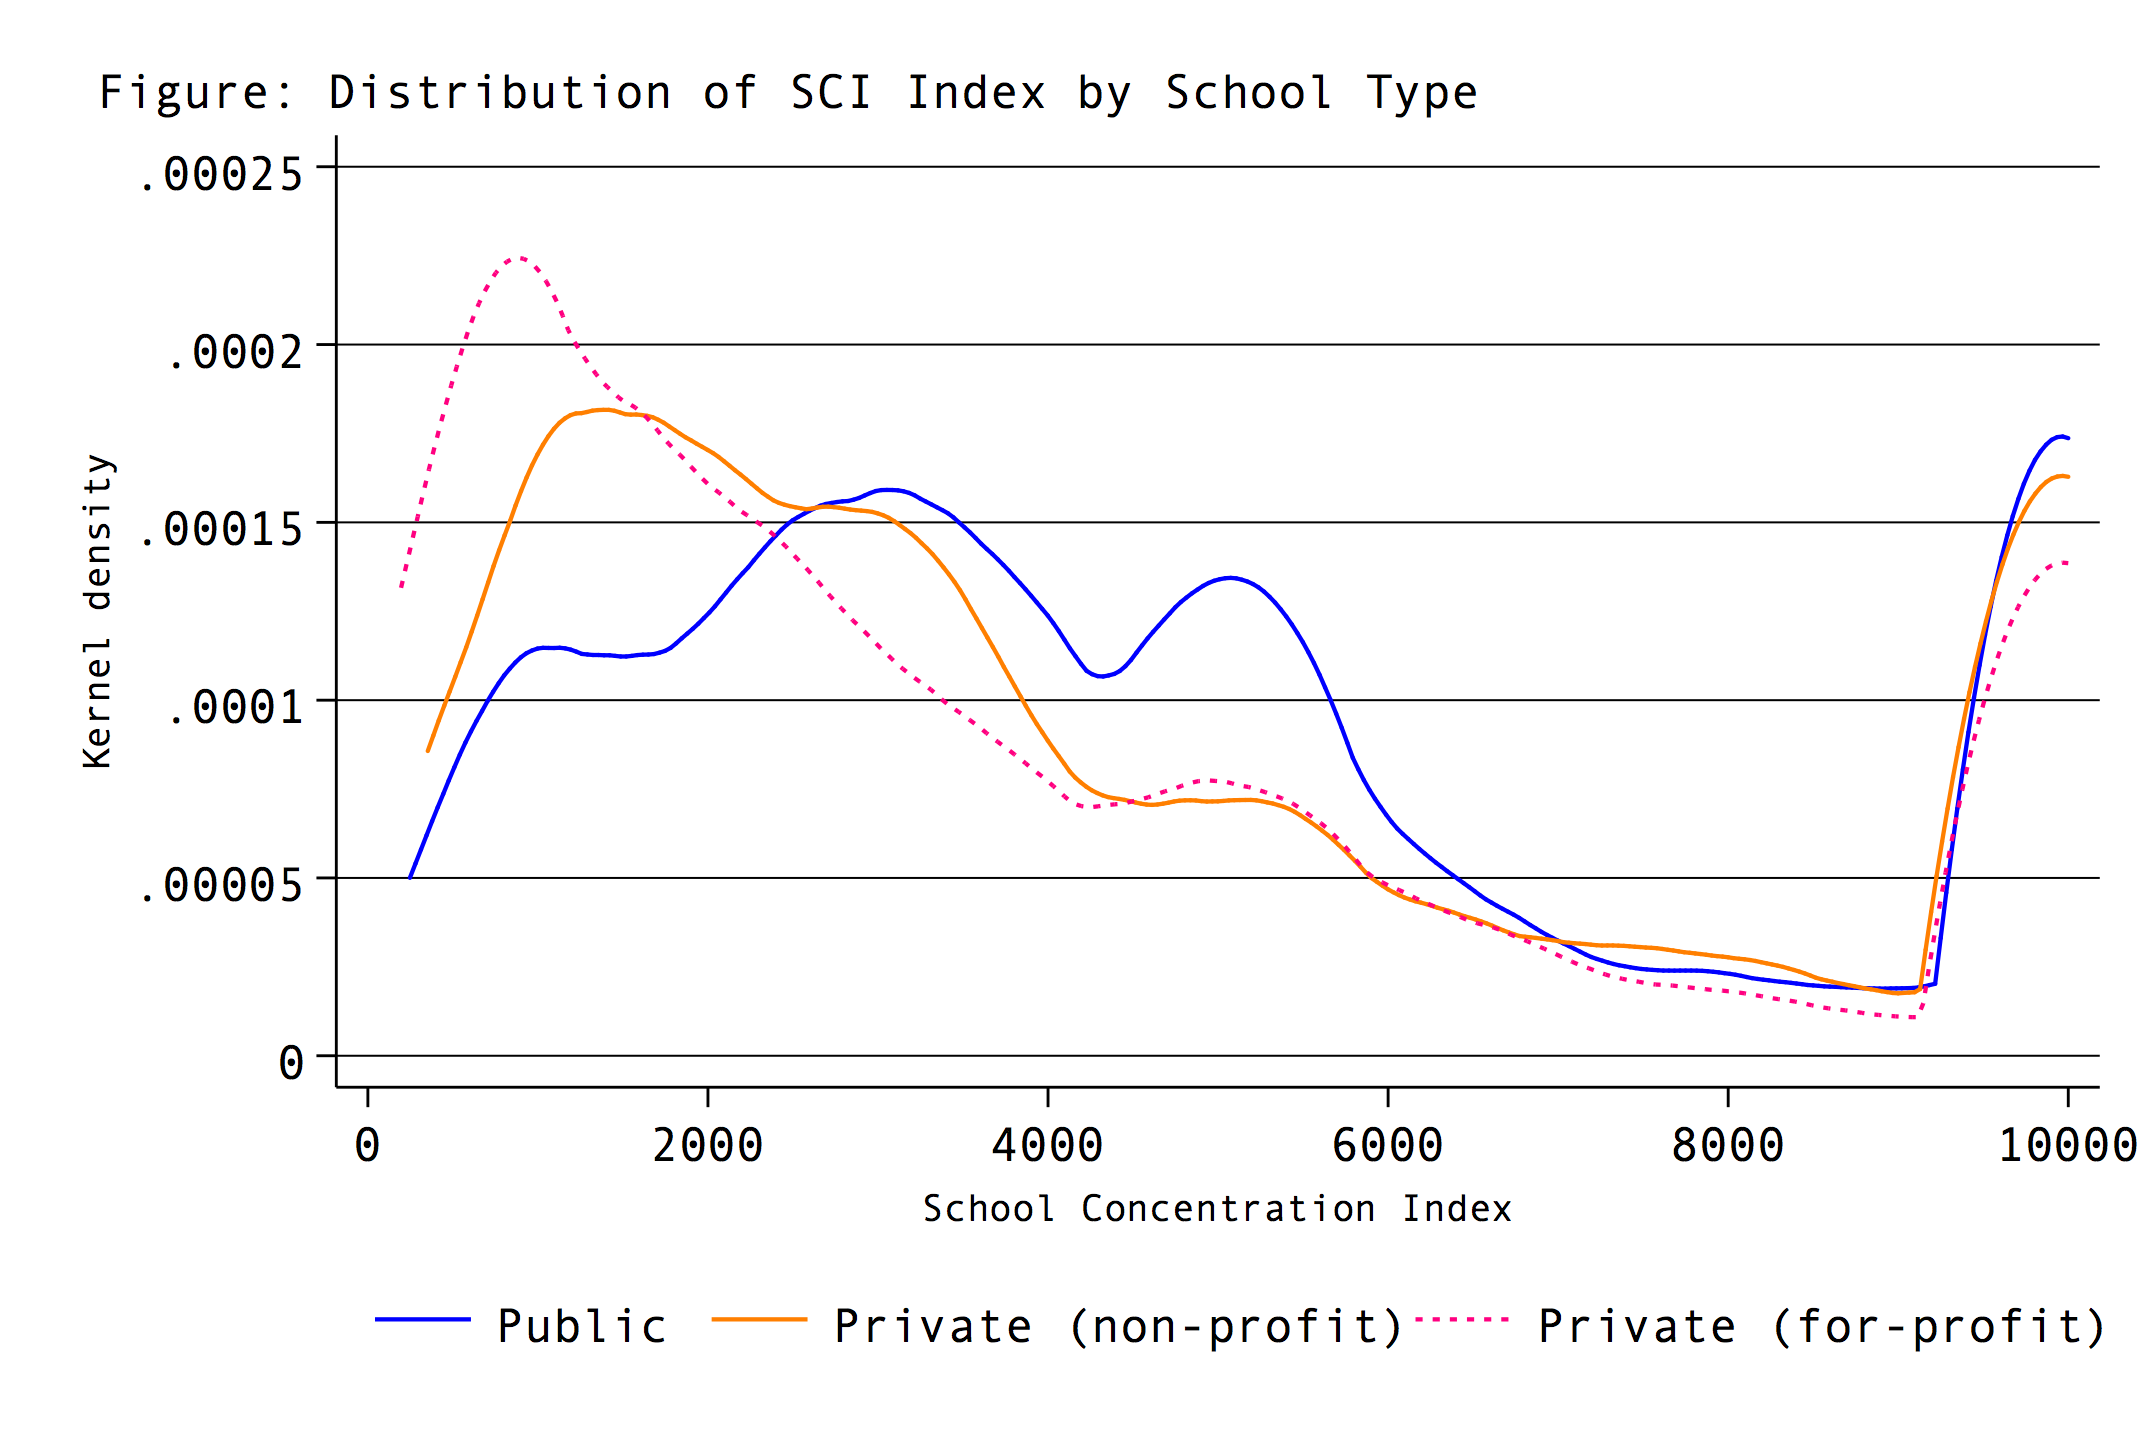 Extremely right-skewed SCI density curves across all institution types.